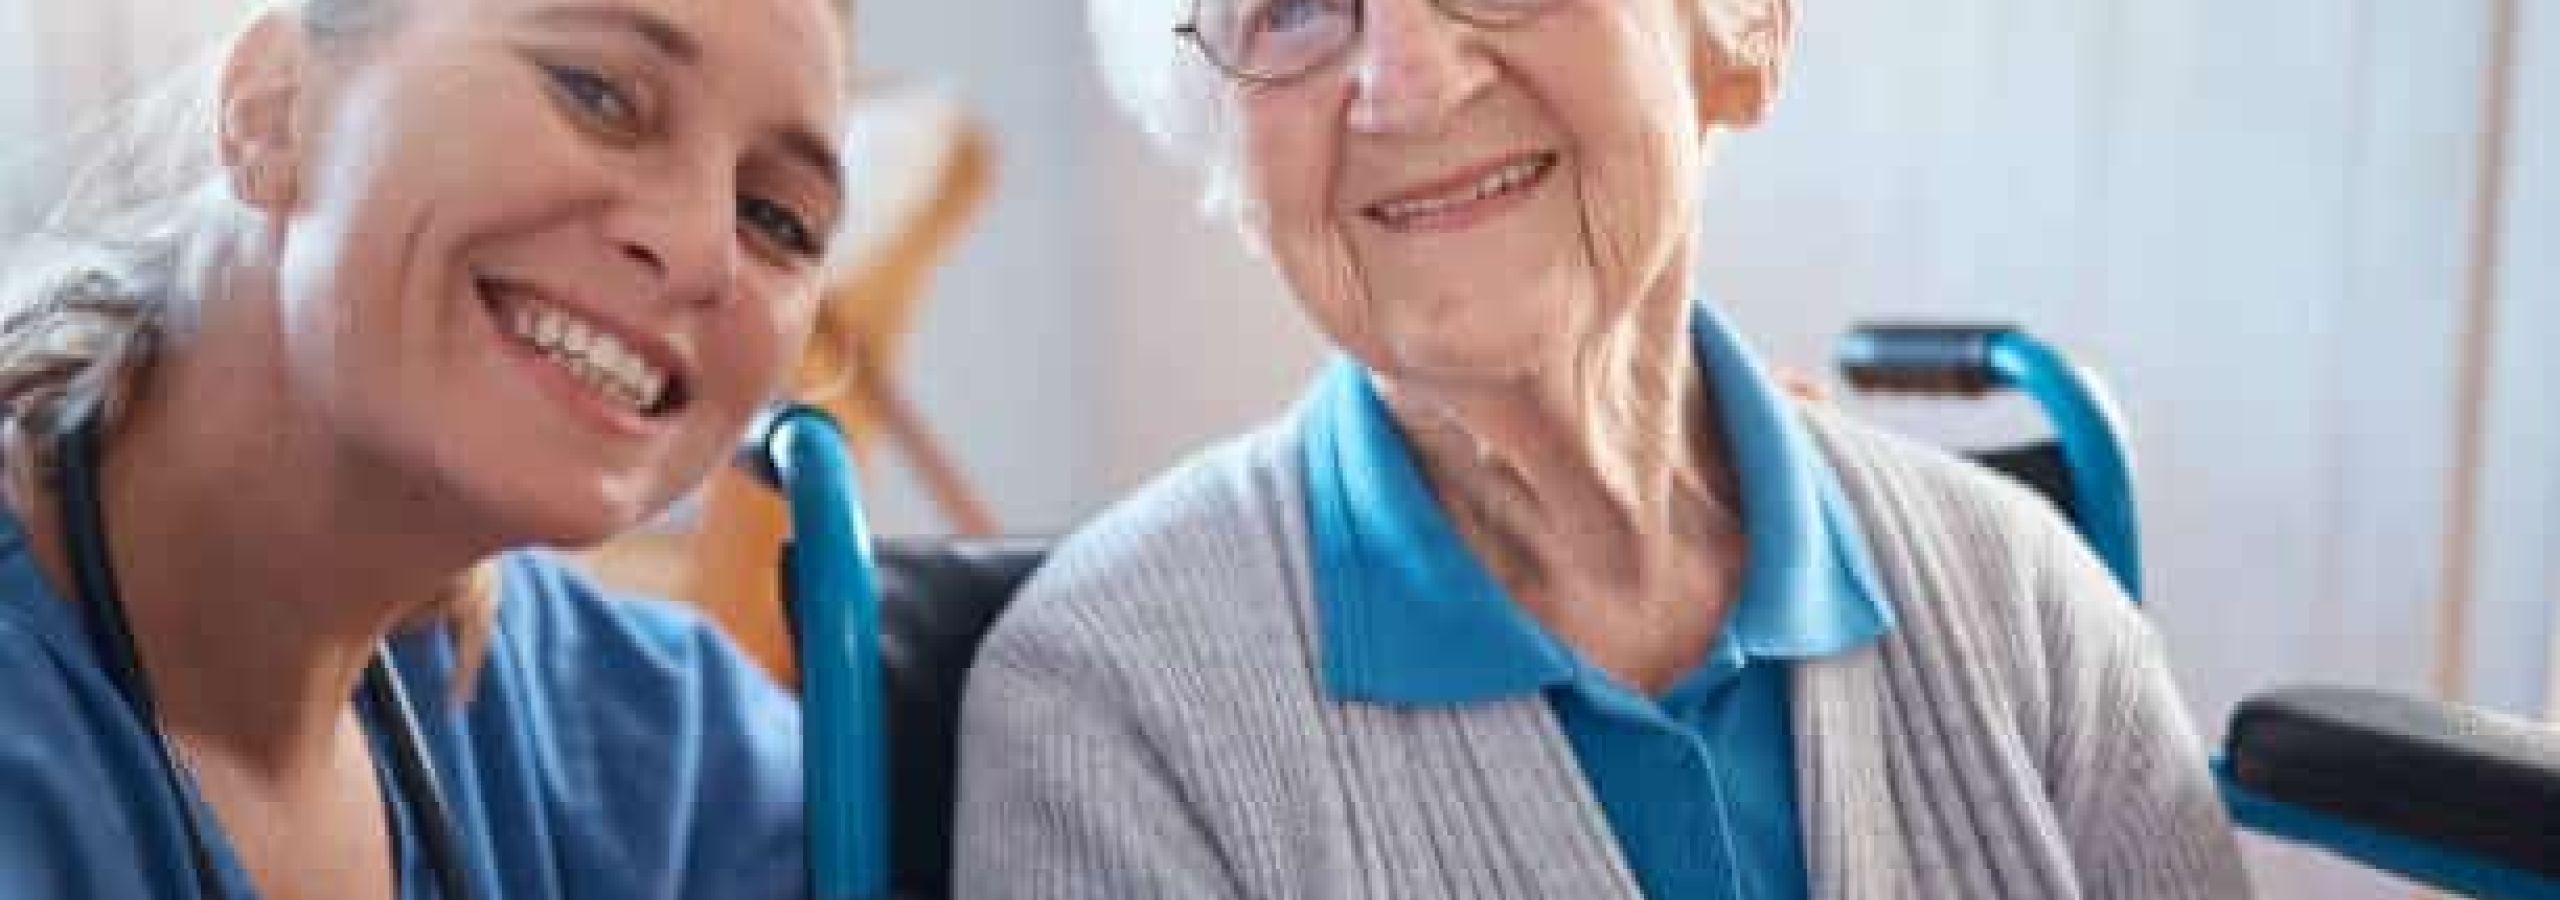 Combatting Senior Isolation with Home Care Services